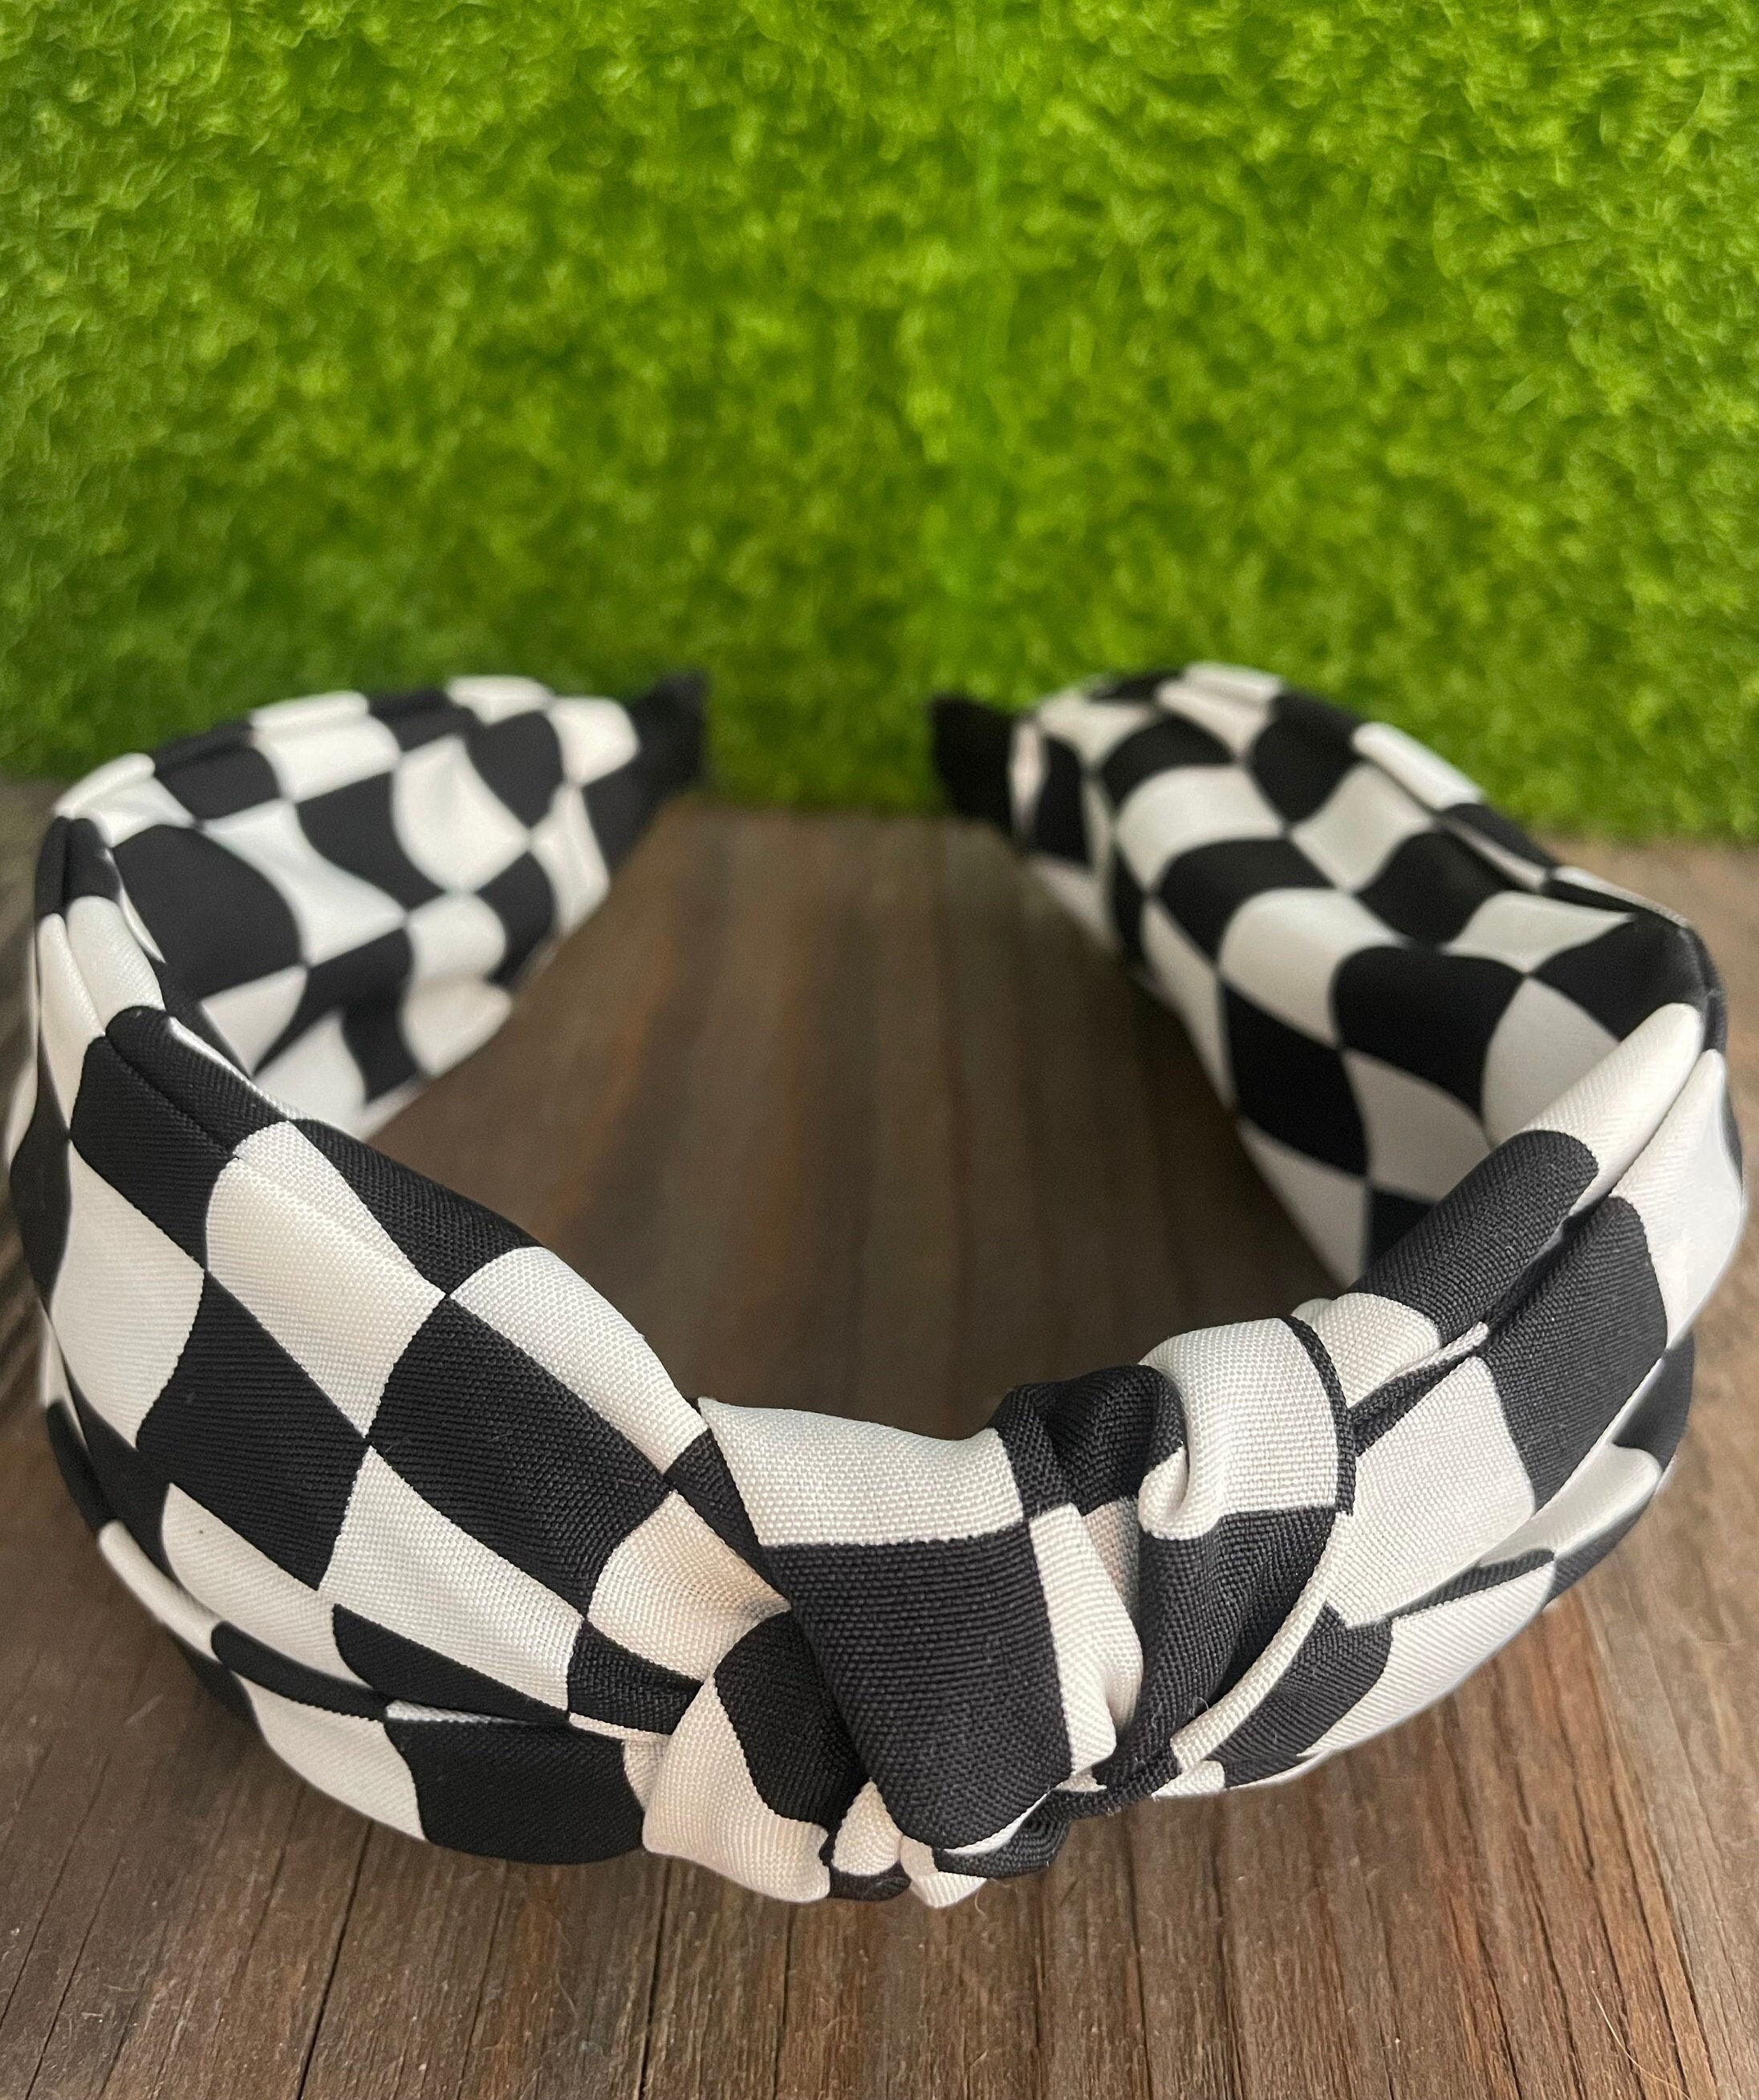 25 Yards Headband Finished End, Lurex Fabric Tape Tip, DIY Hairband End,  Black Adhesive Thread, Tape Cover Corner Cloth, for Hairband Making 